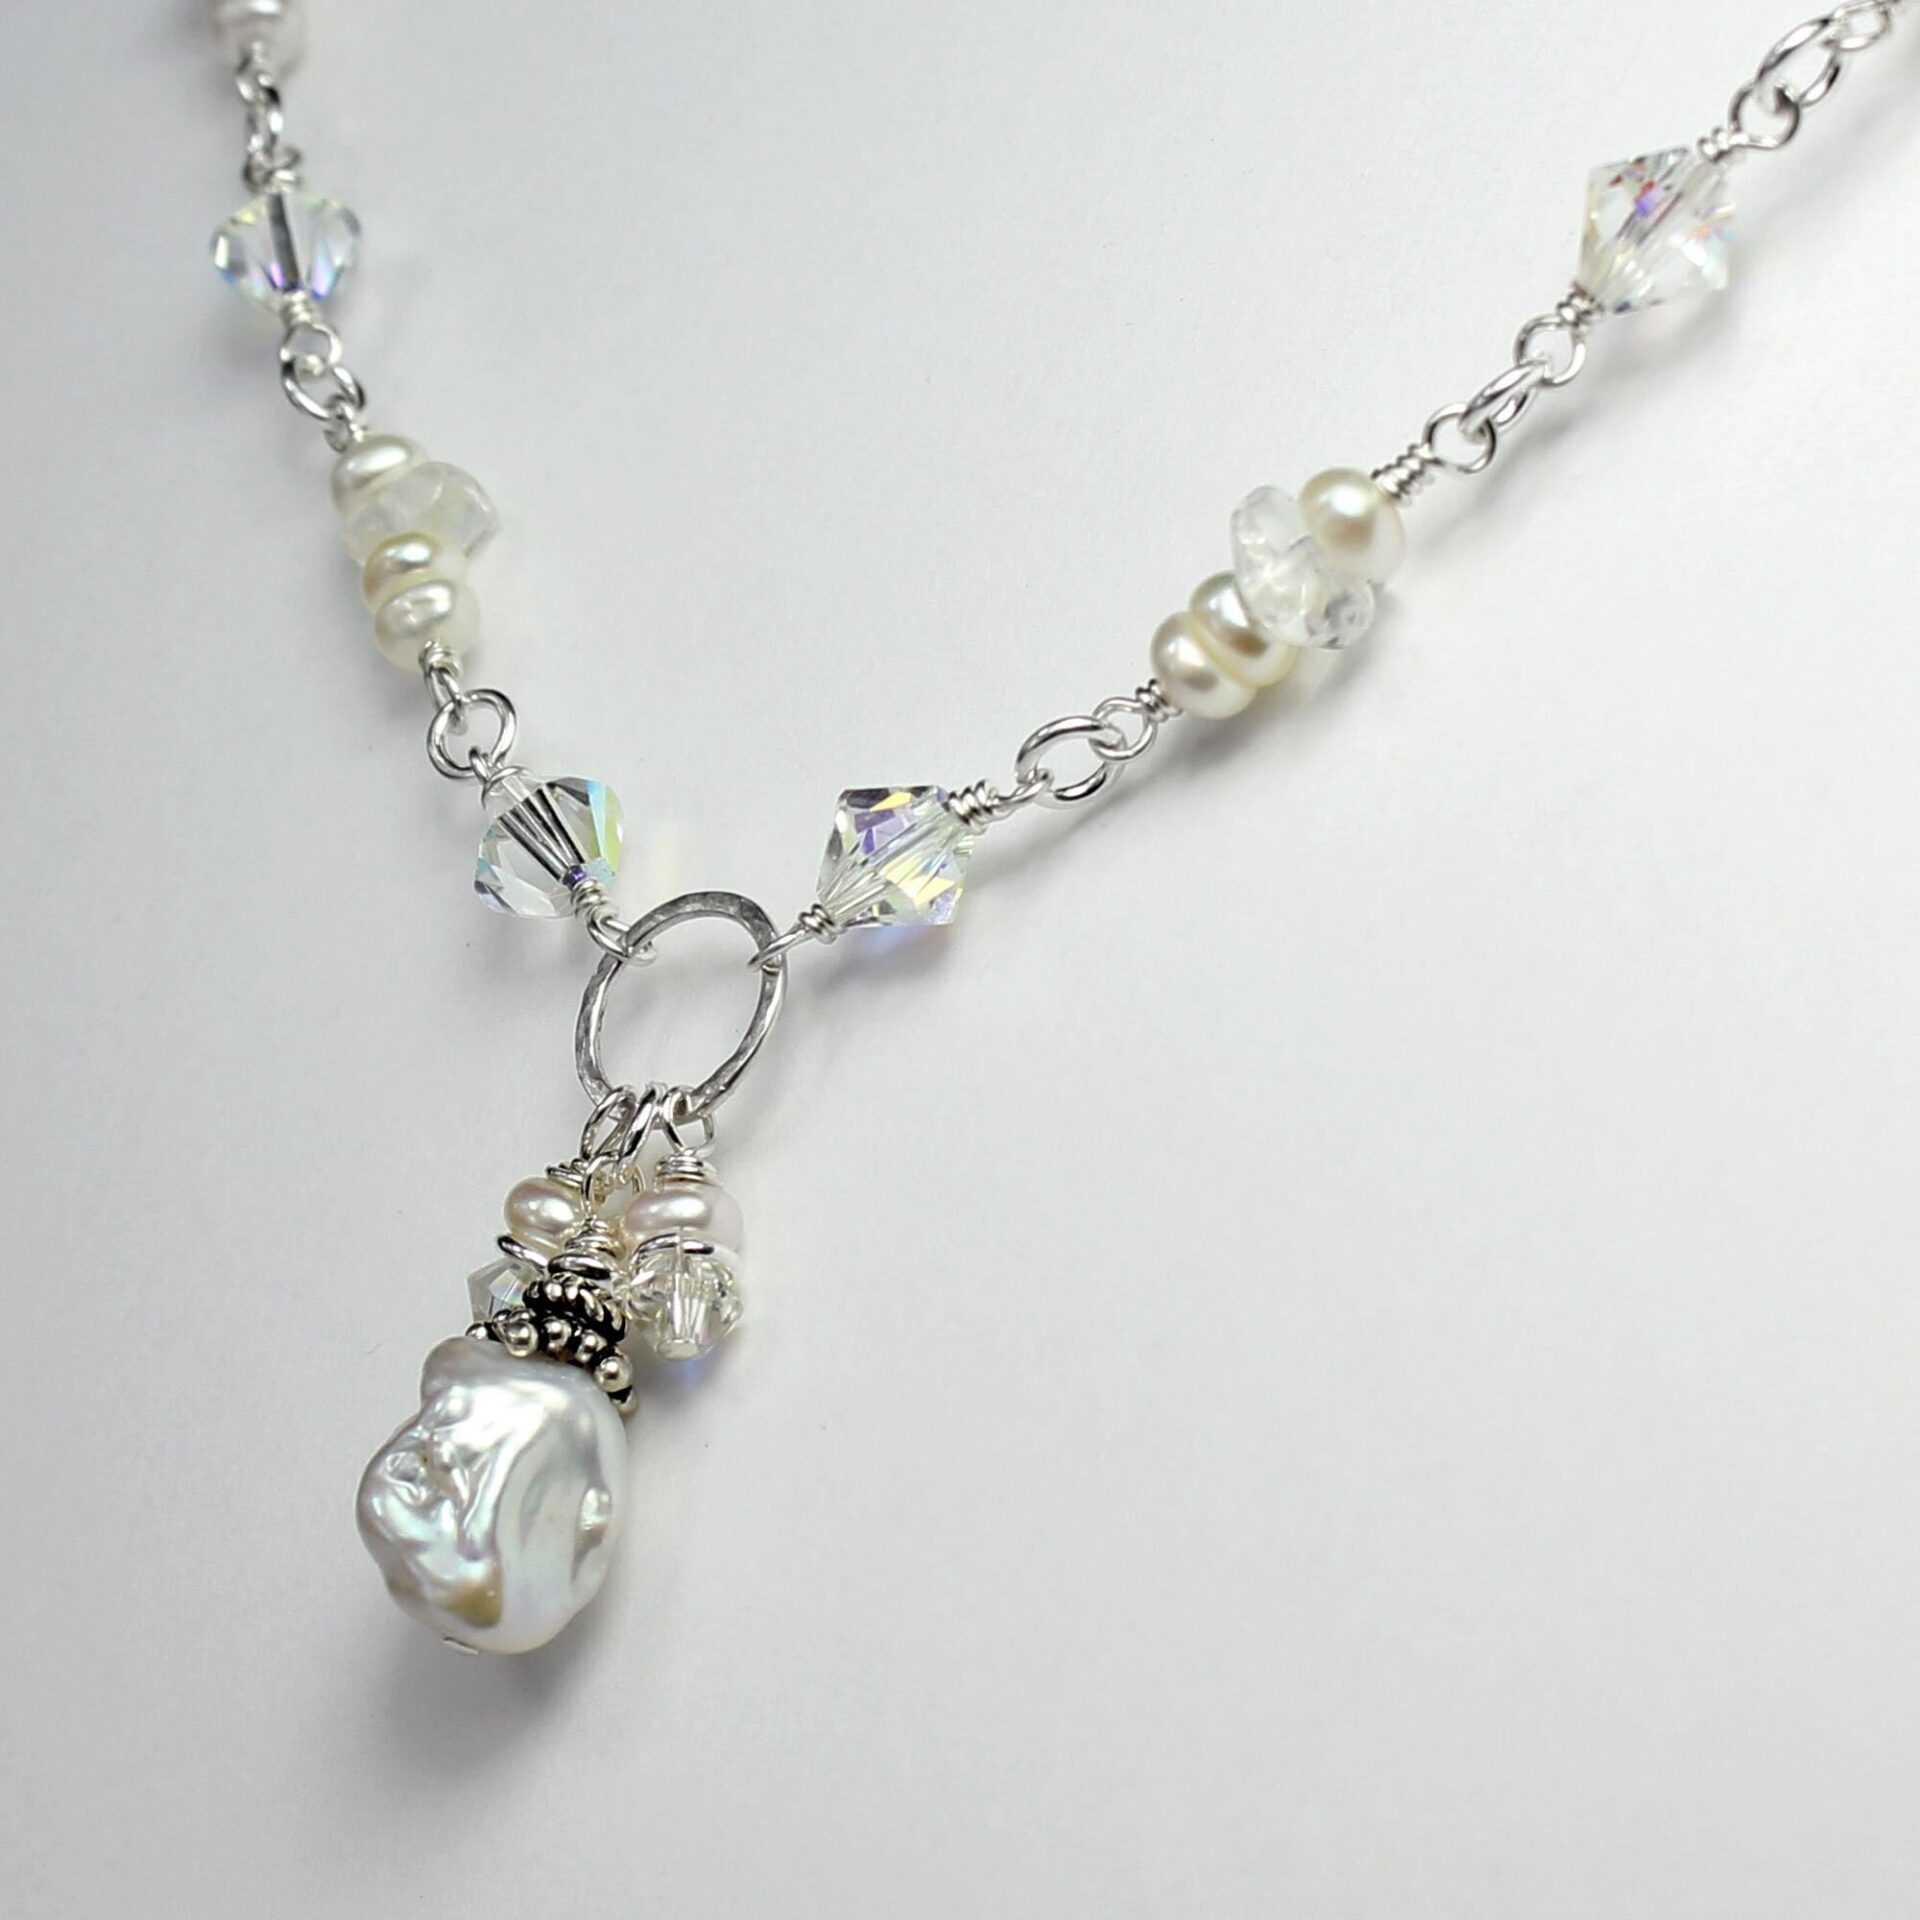 White Keshi Pearl & Crystals Necklace